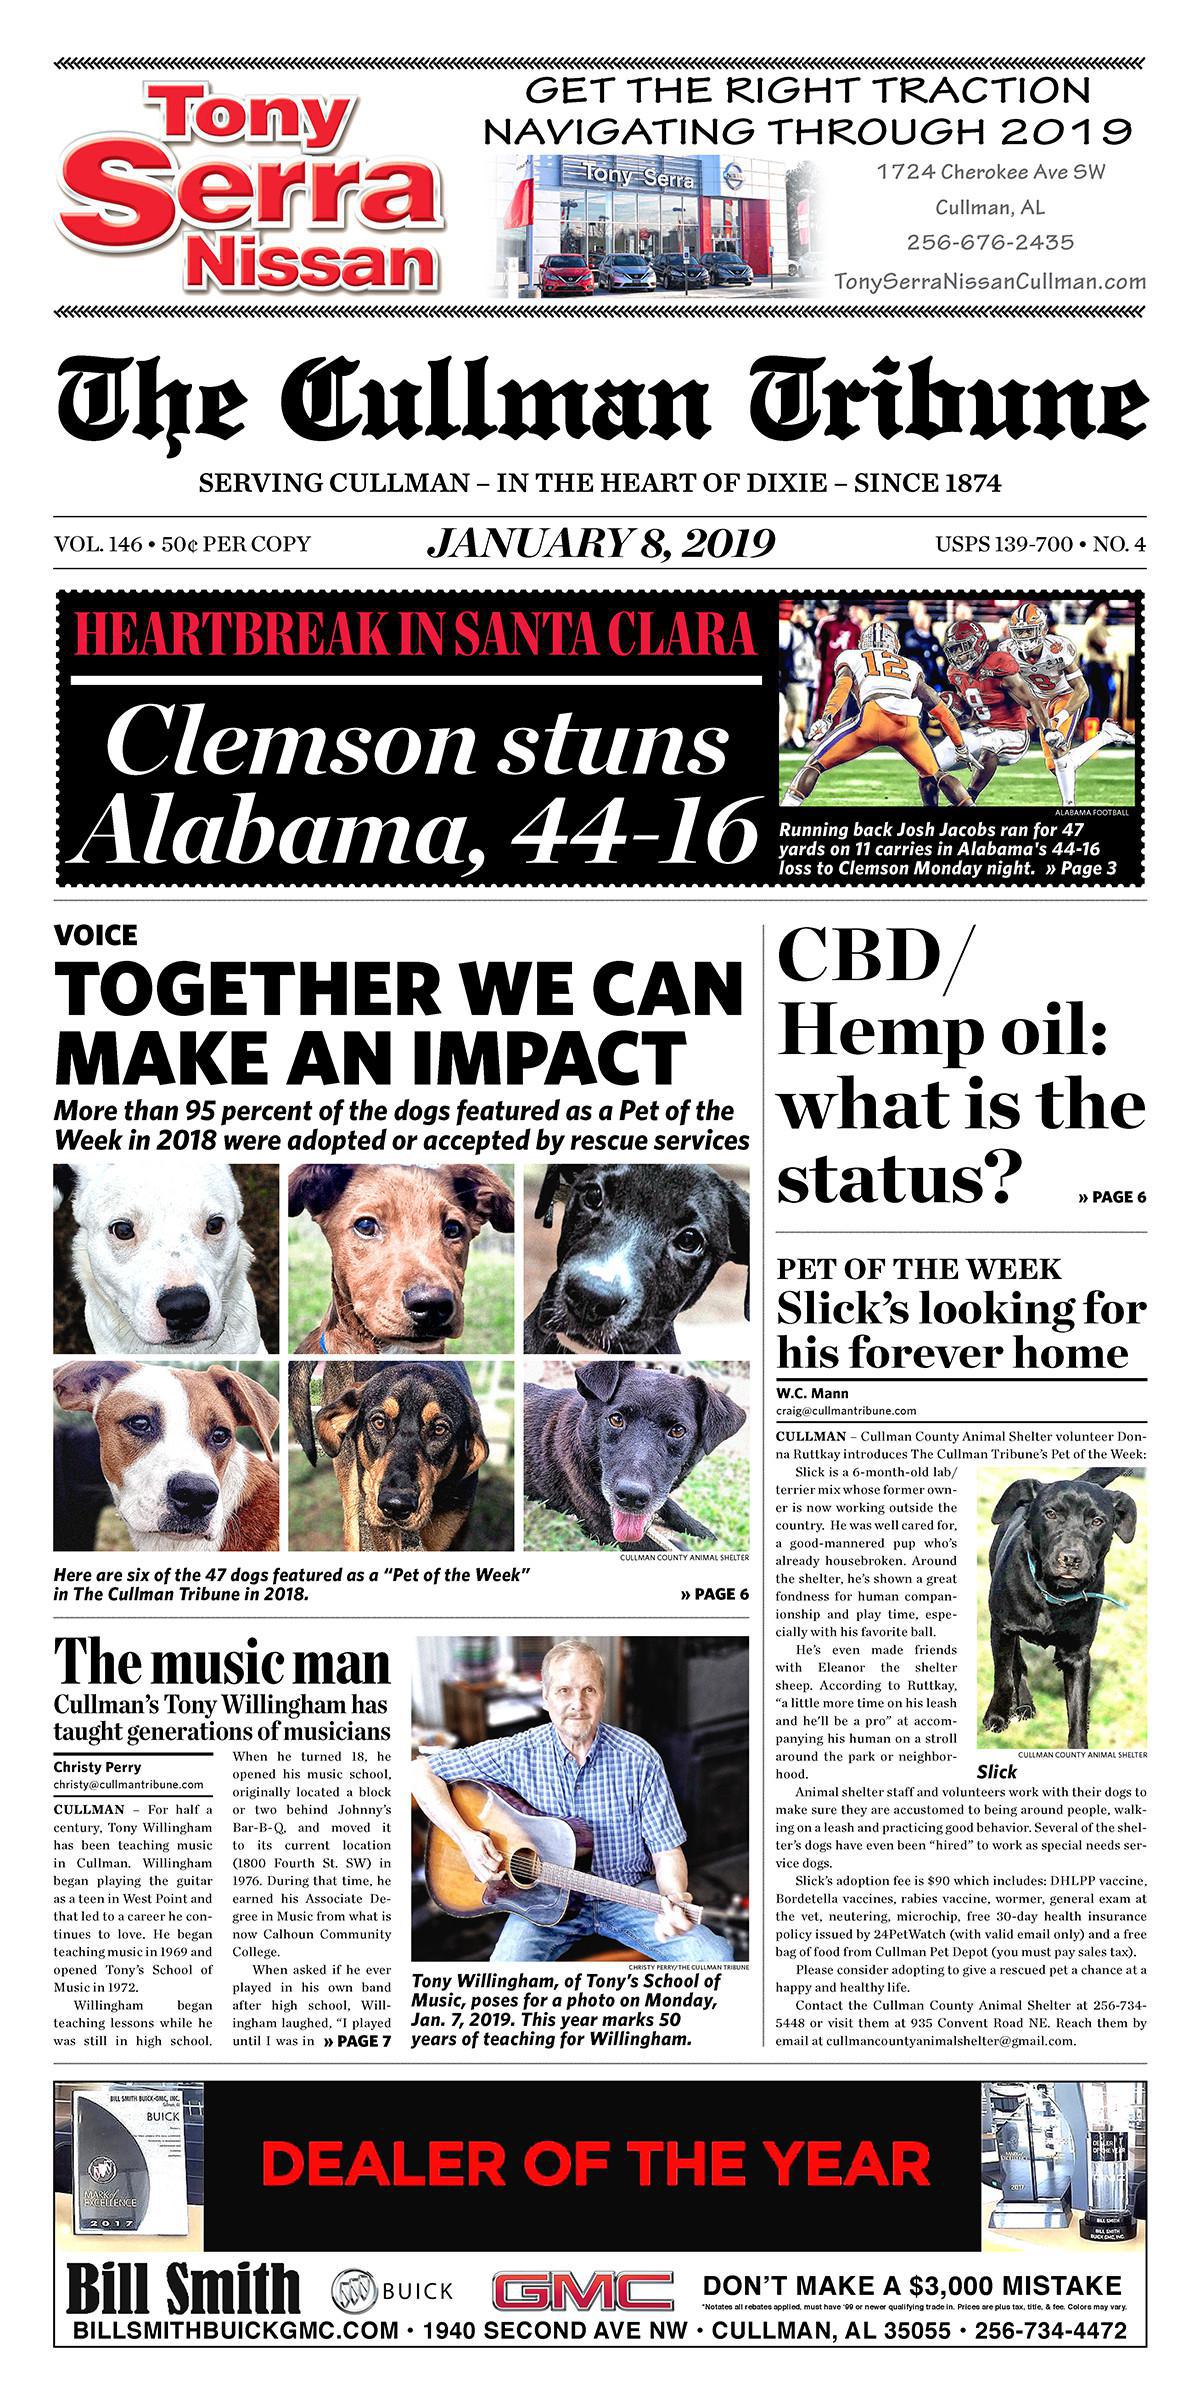 Good Morning Cullman! The 01-08-2019 edition of the Cullman Tribune is now ready to view